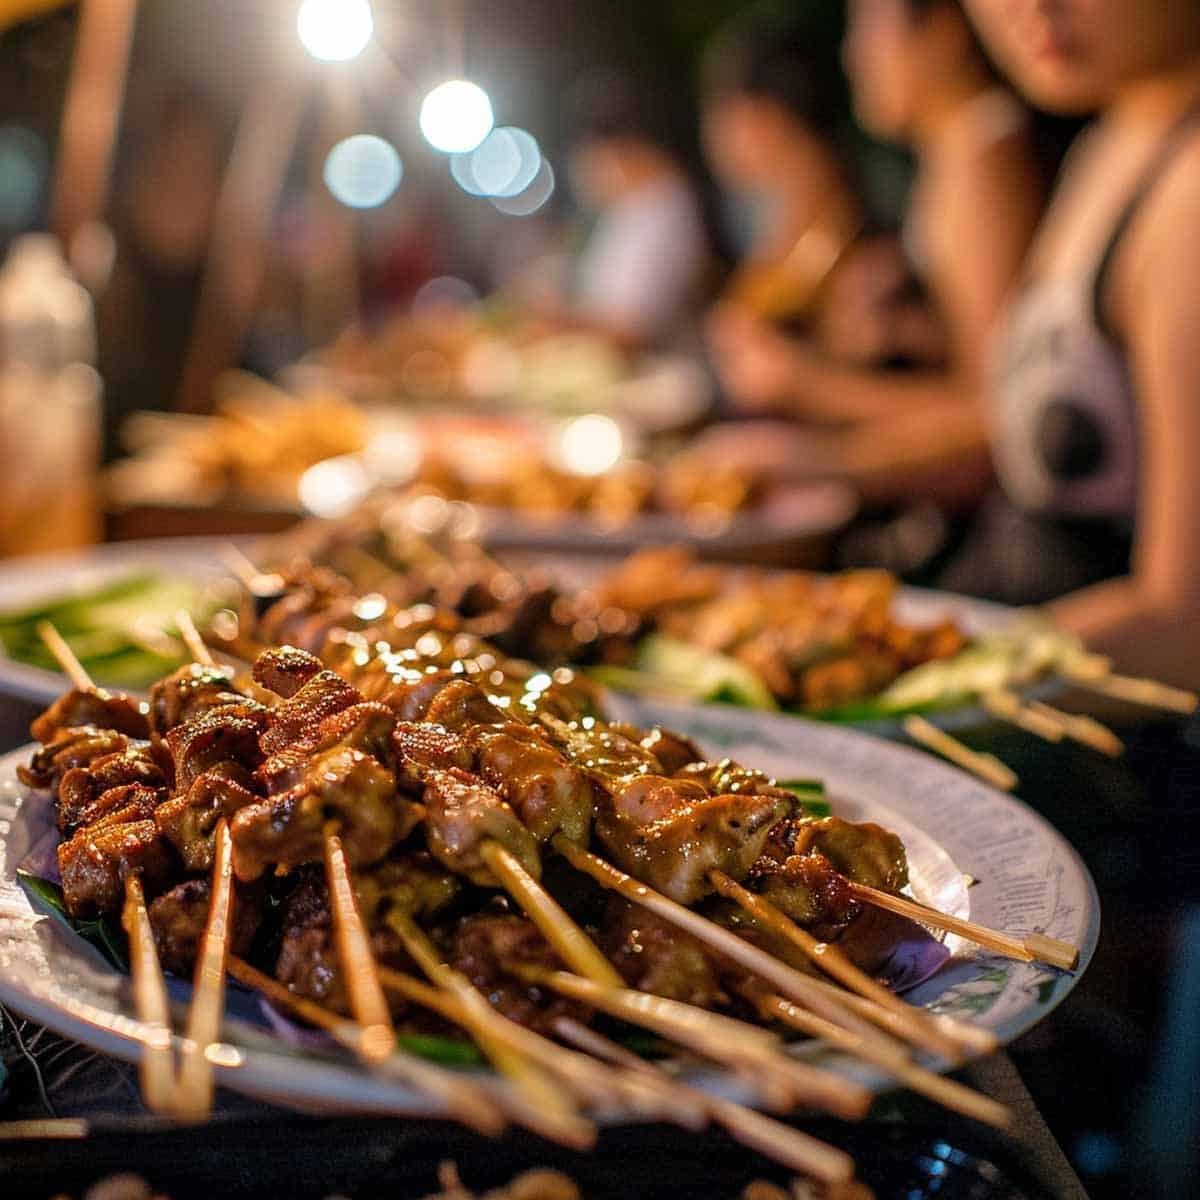 roup of friends enjoying Chicken Satay (Satay Gai) together, dipping skewers into peanut sauce at a vibrant night market